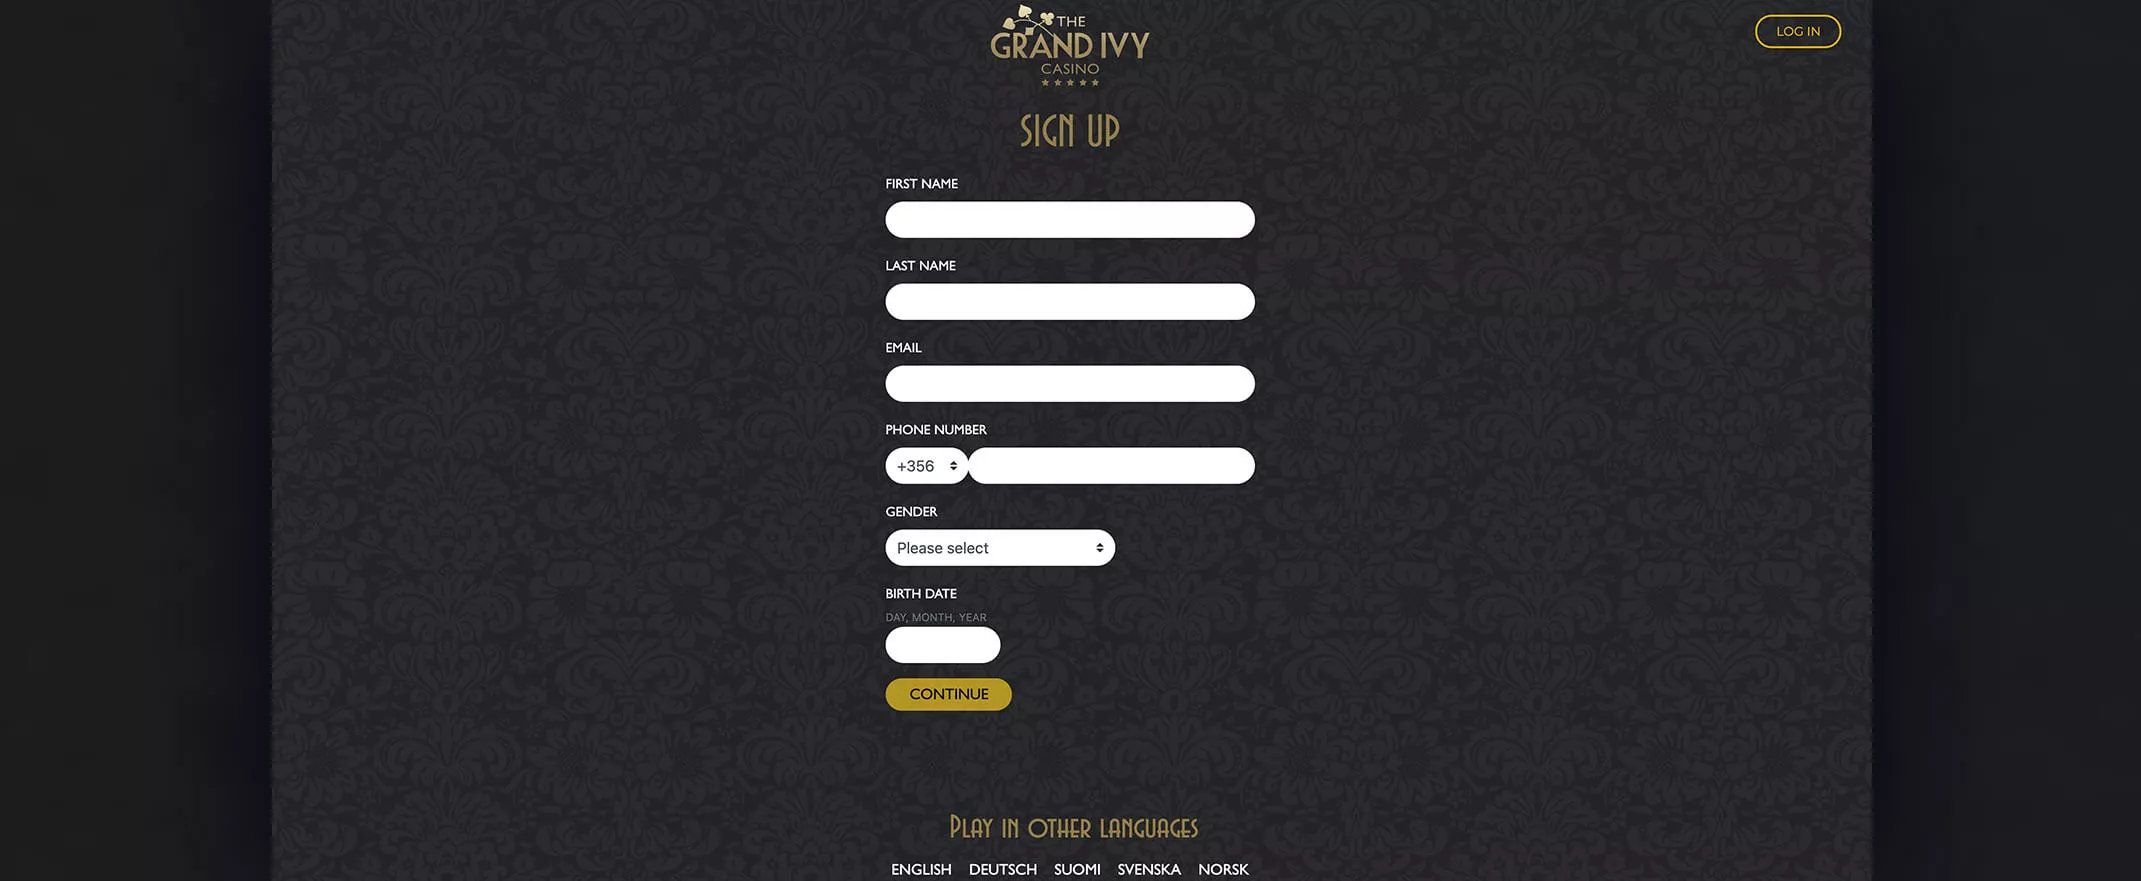 The Grand Ivy screenshot of the registration